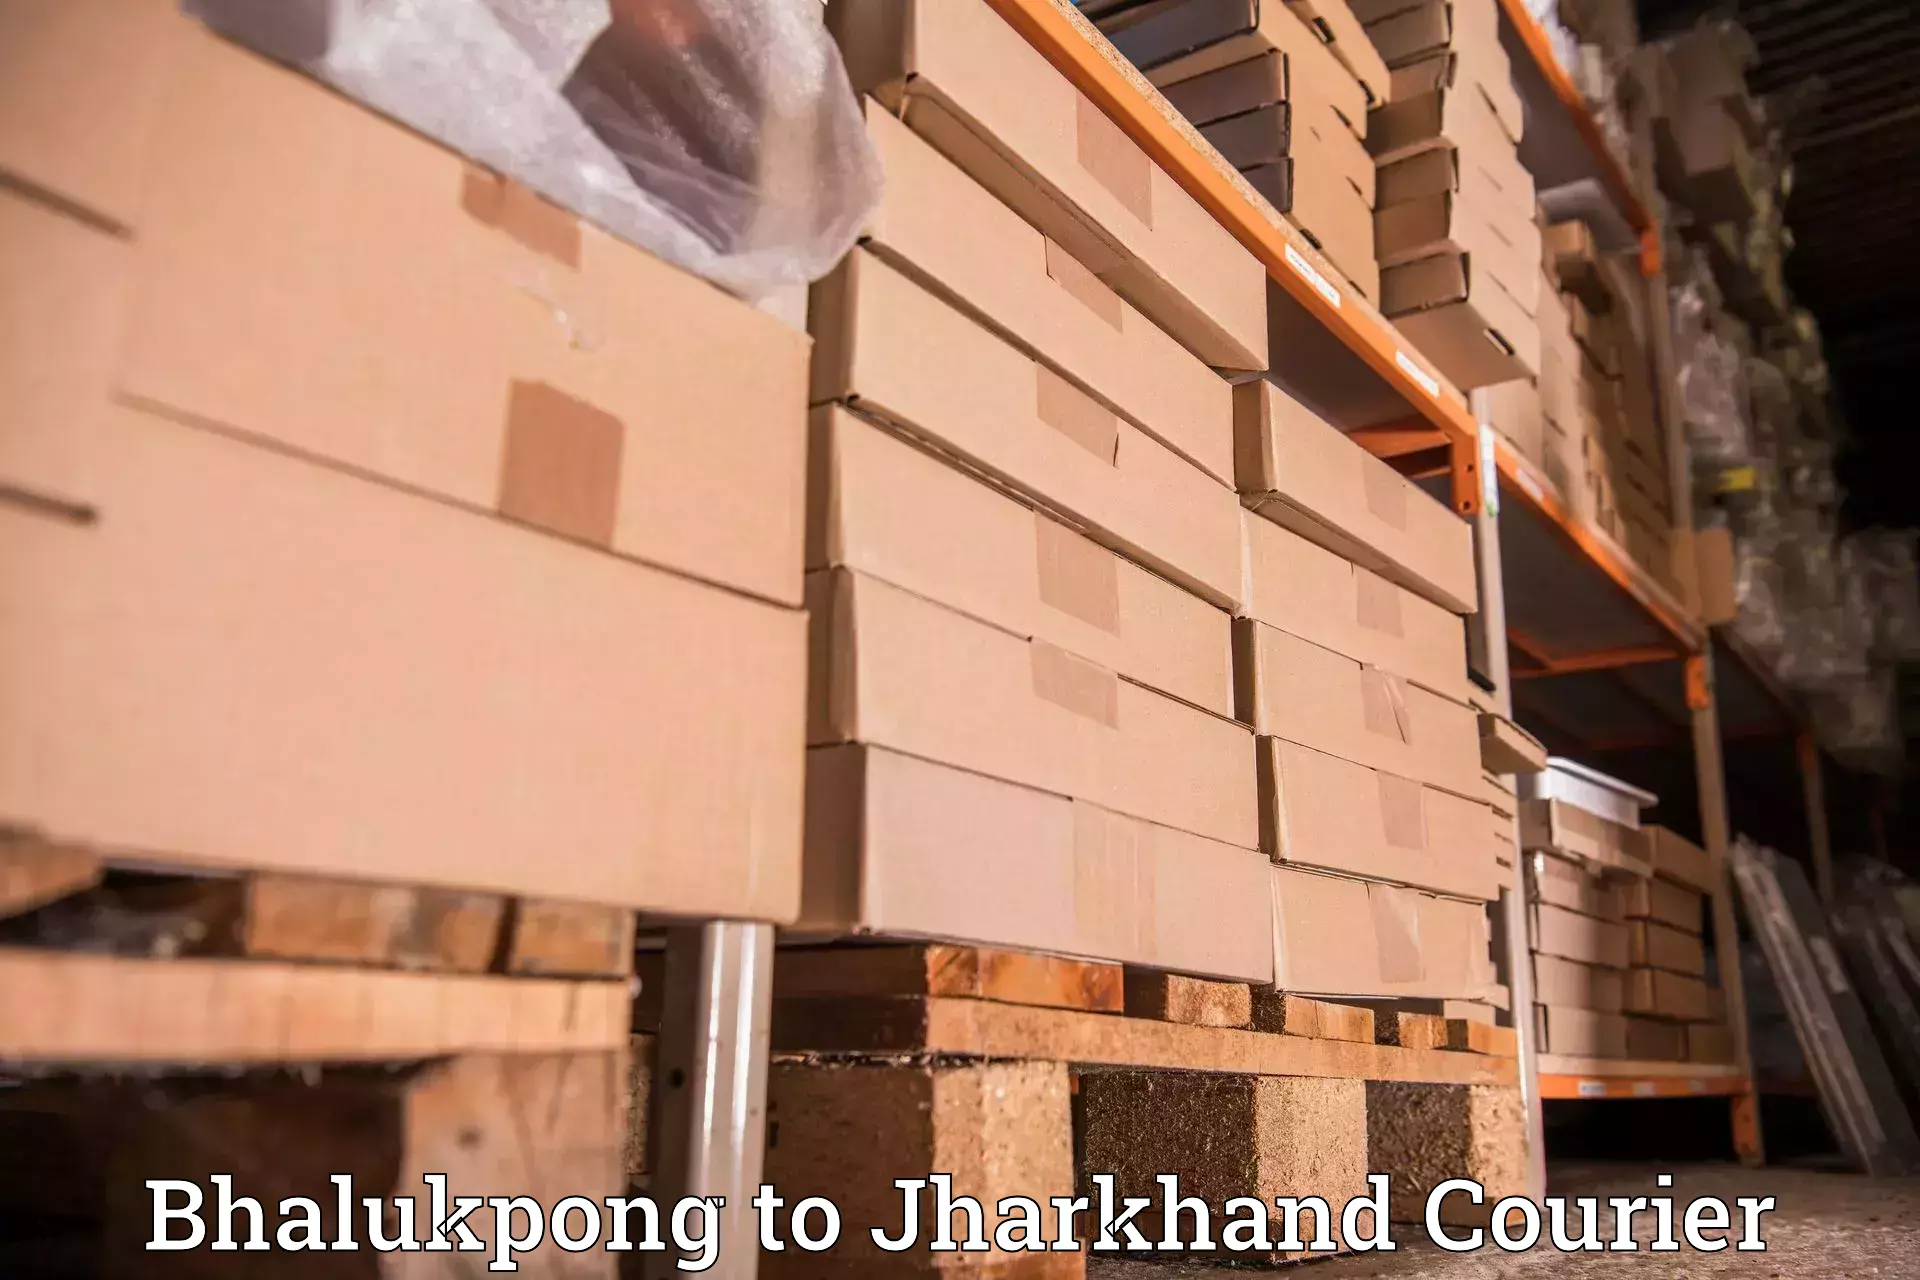 Courier service partnerships in Bhalukpong to Jharia